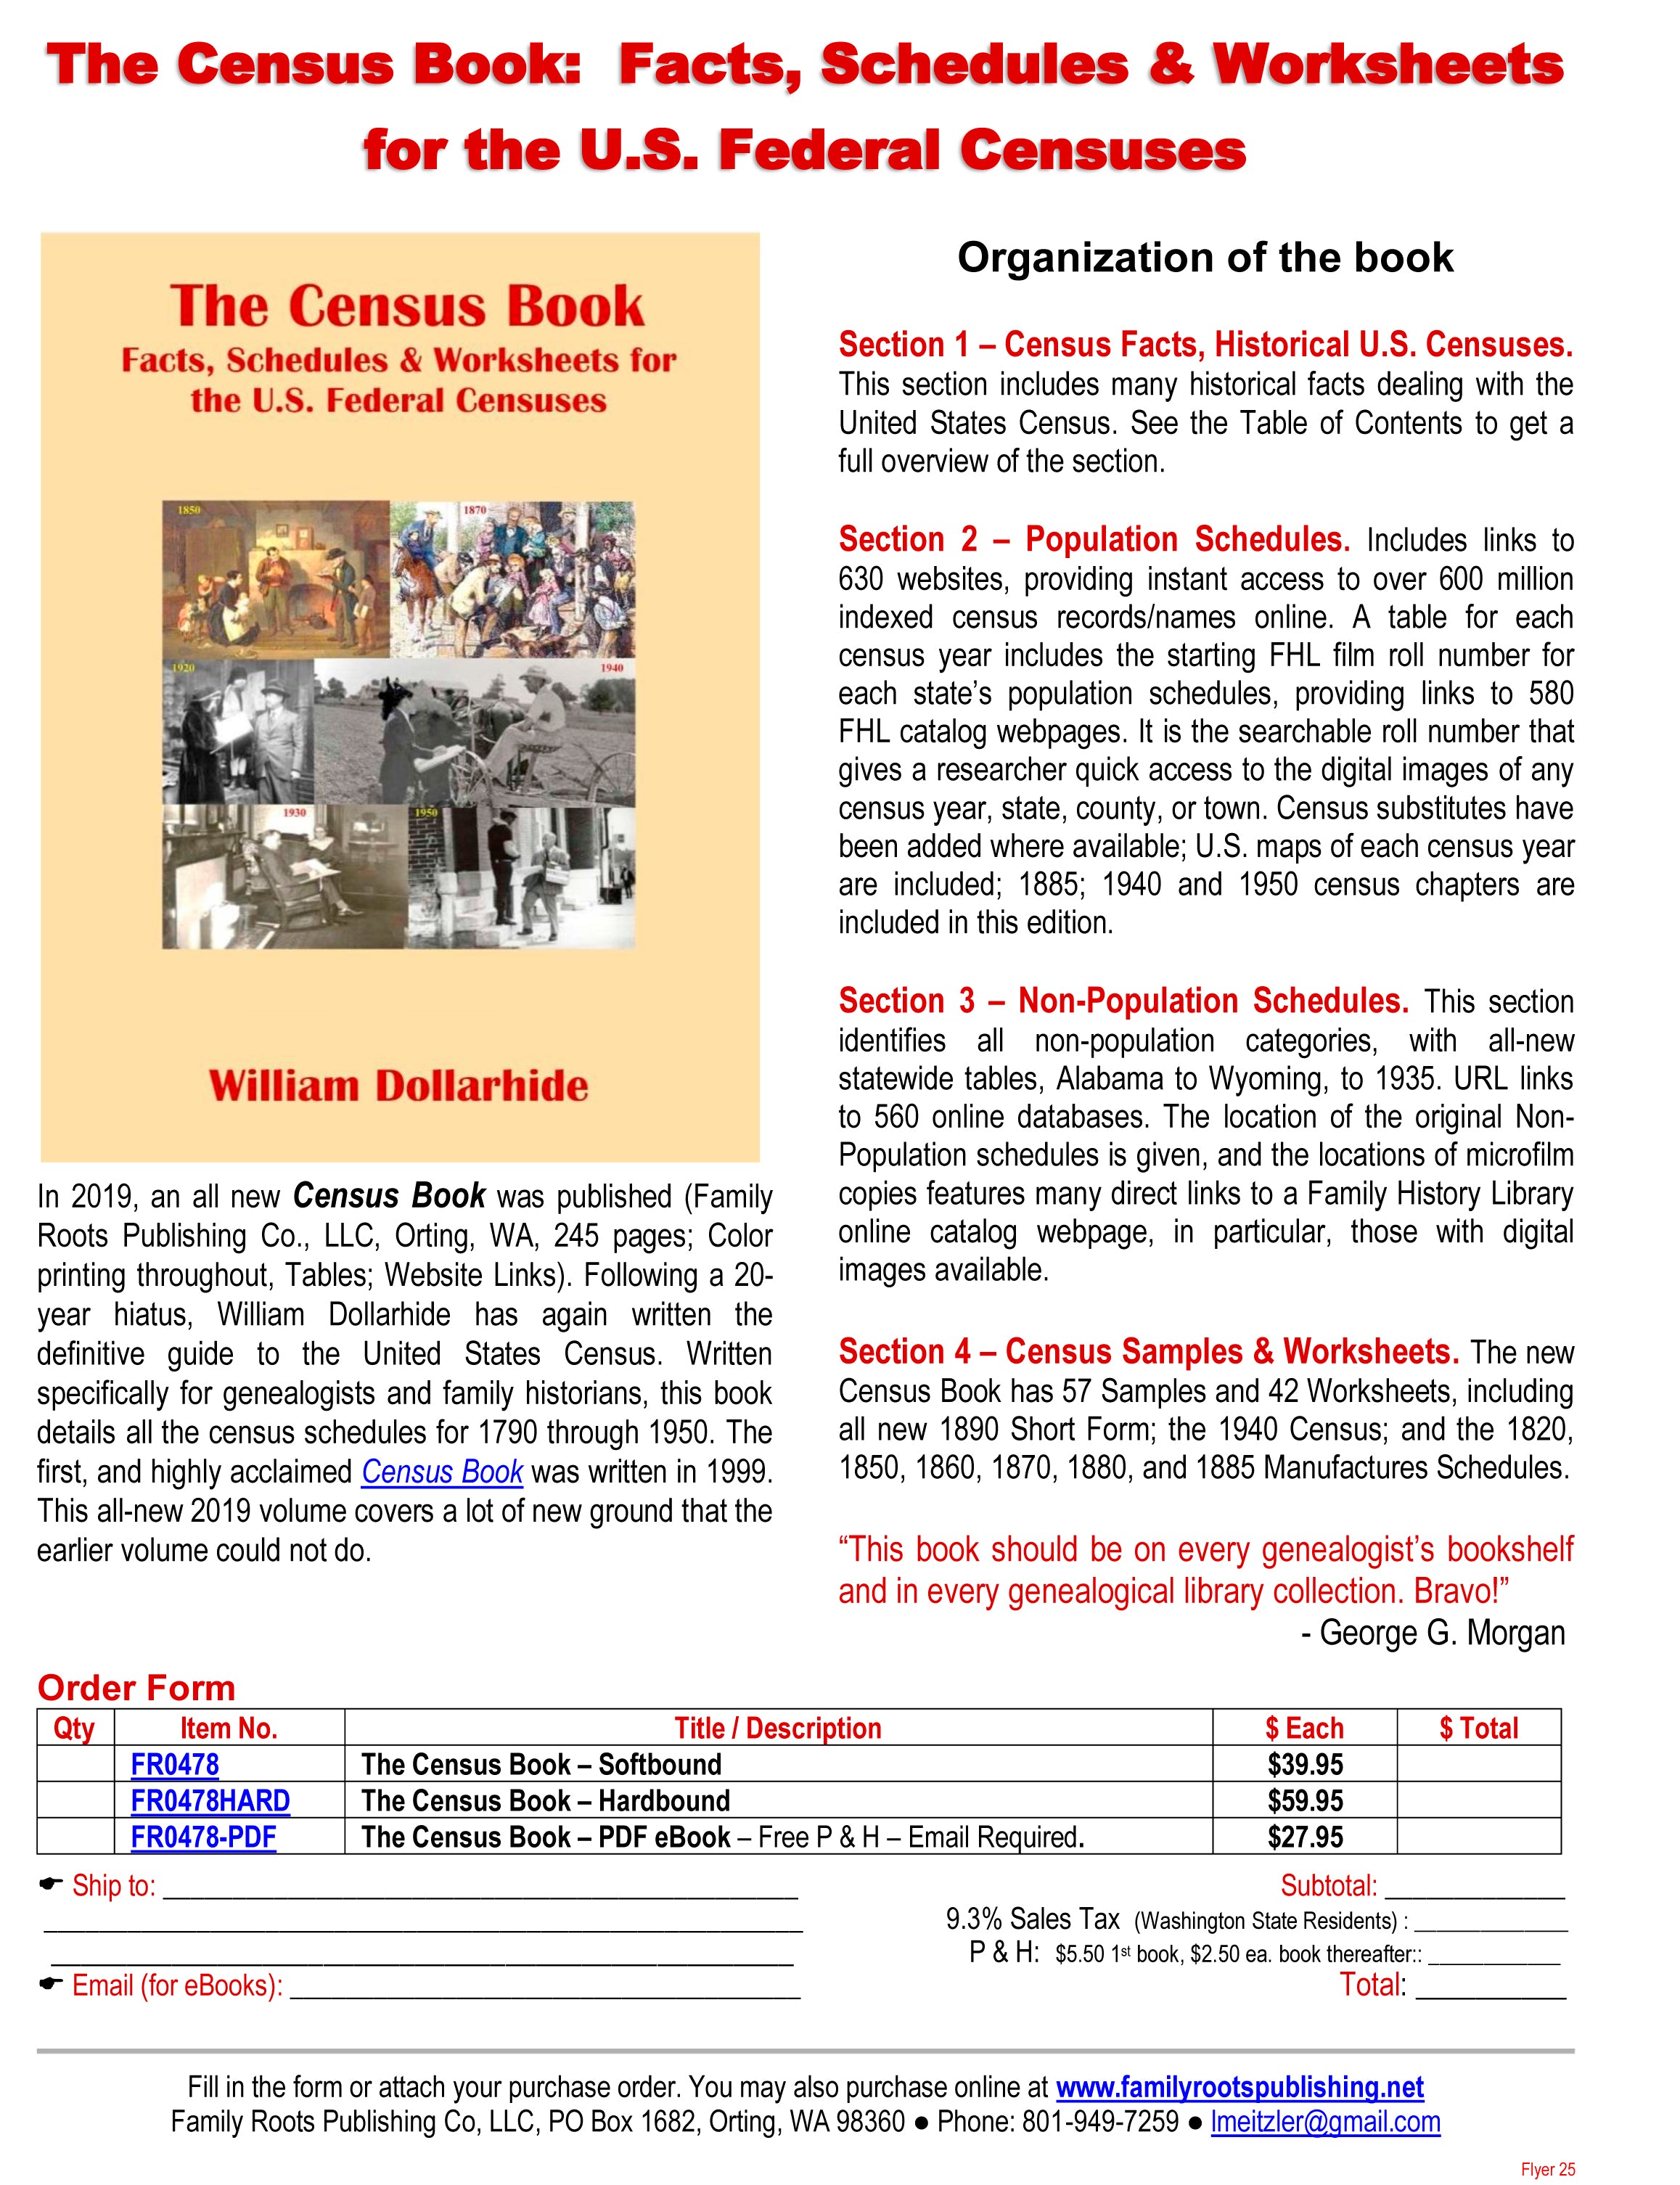 FREE FLYER: Downloadable PDF Flyer - The Census Book: Facts, Schedules & Worksheets for the U.S. Federal Censuses